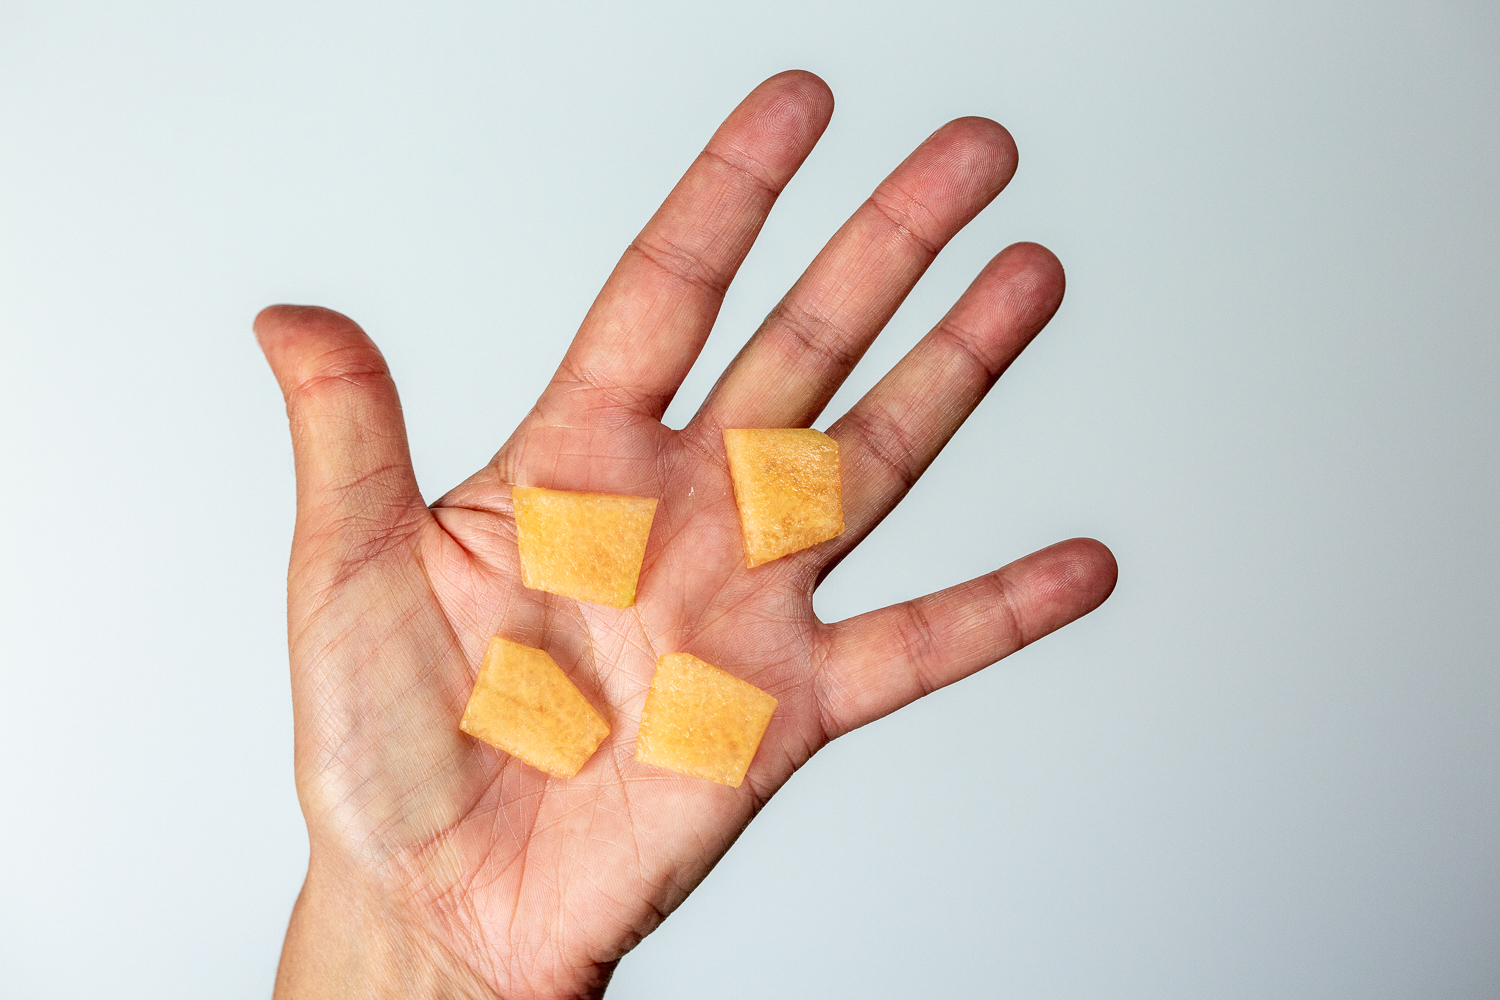 a hand holding four bite-sized pieces of cantaloupe cut from a thin slice